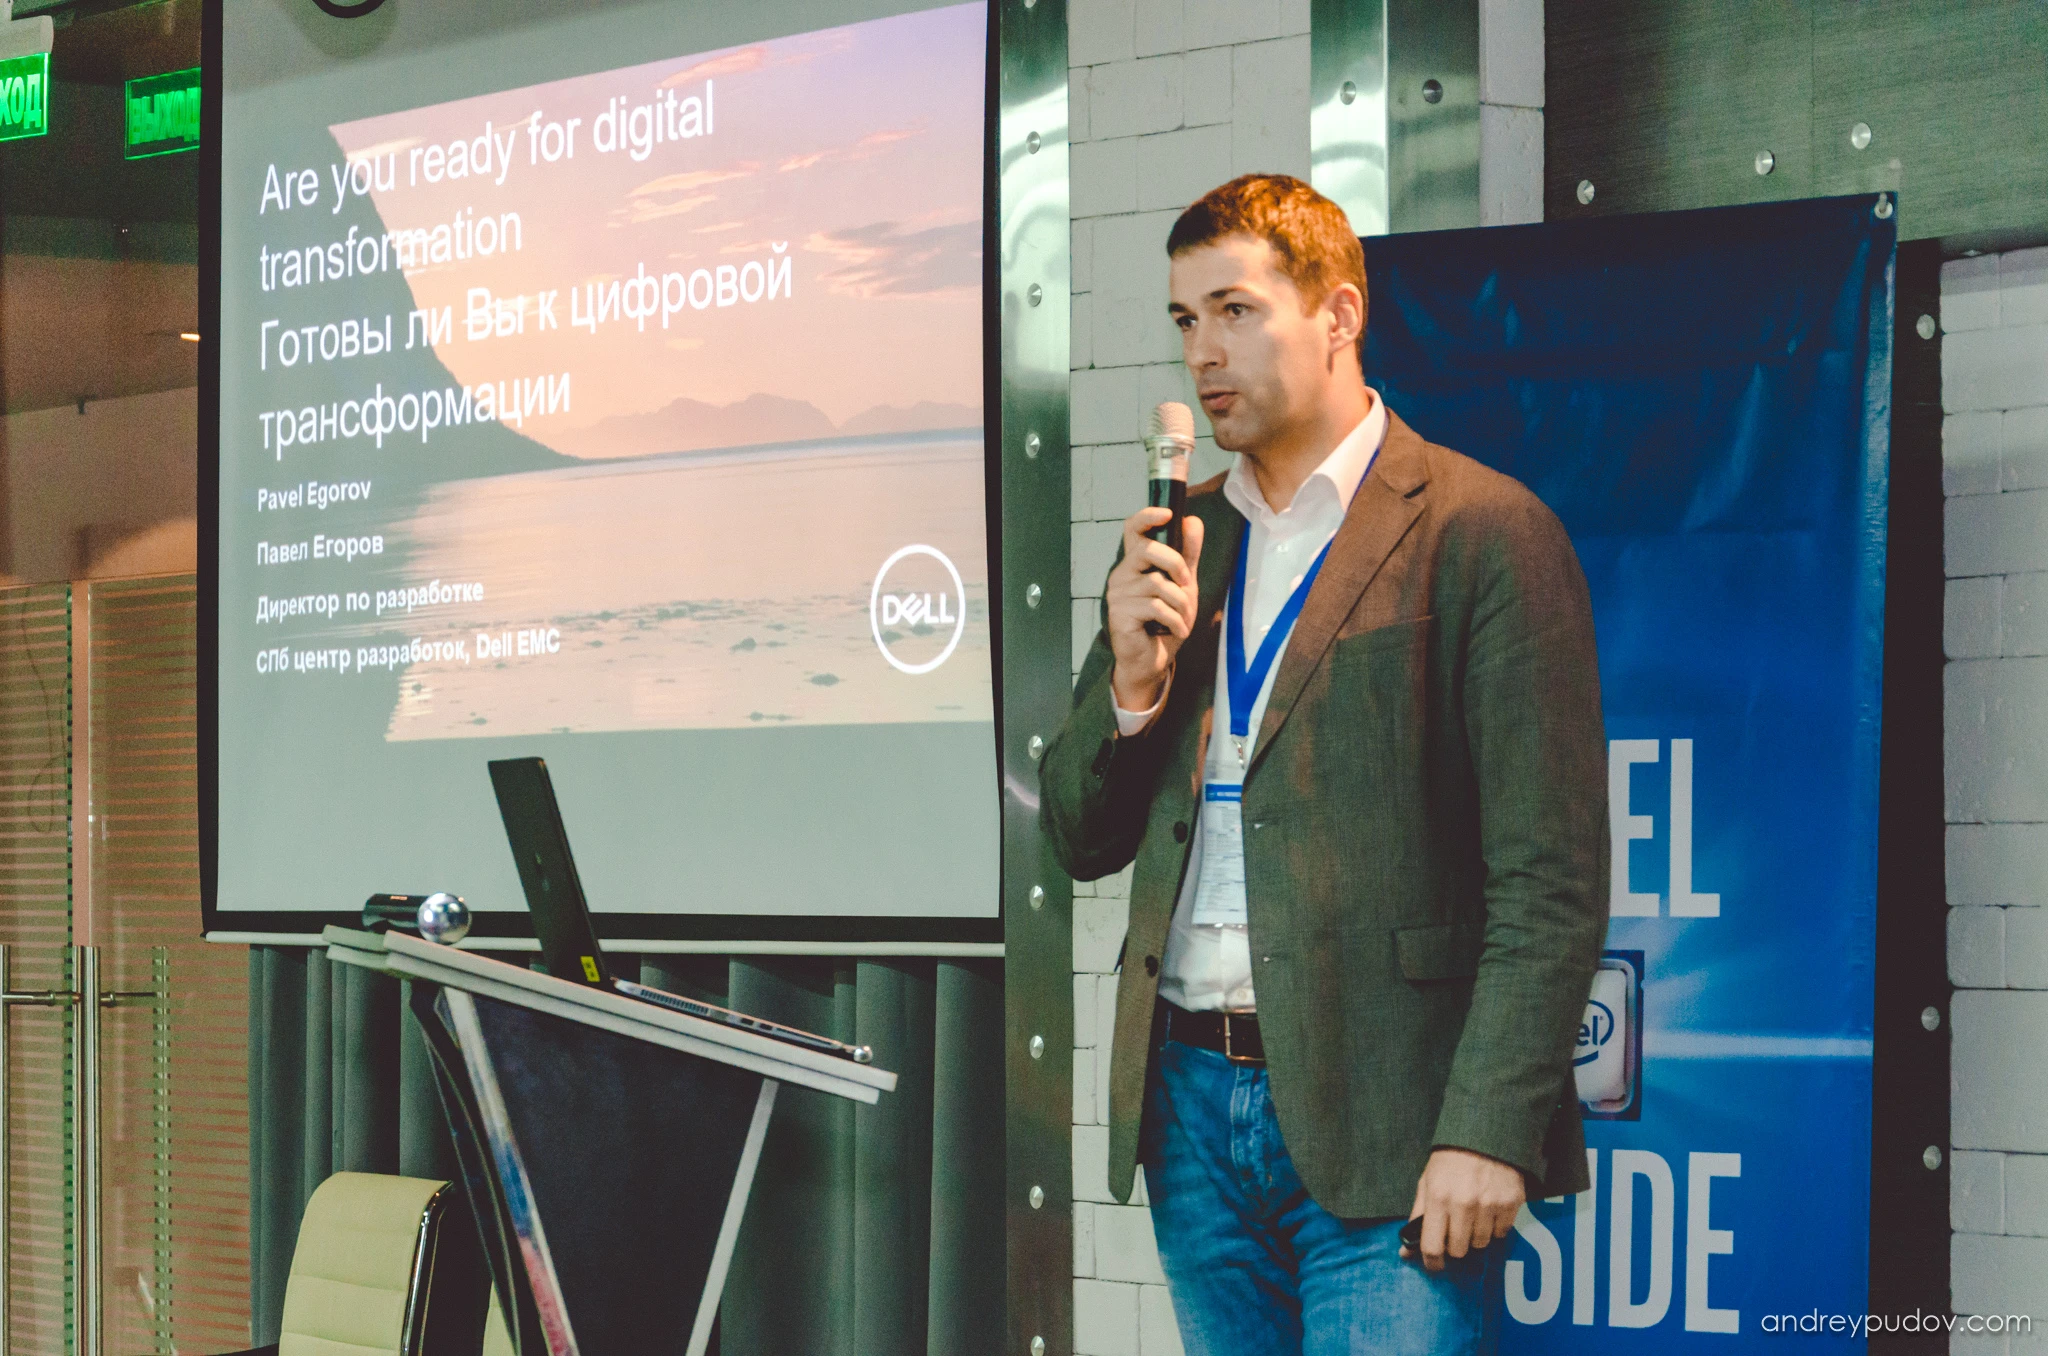 Intel Partners Day - Pavel Egorov - Chief Executive Officer at Dell Technologies